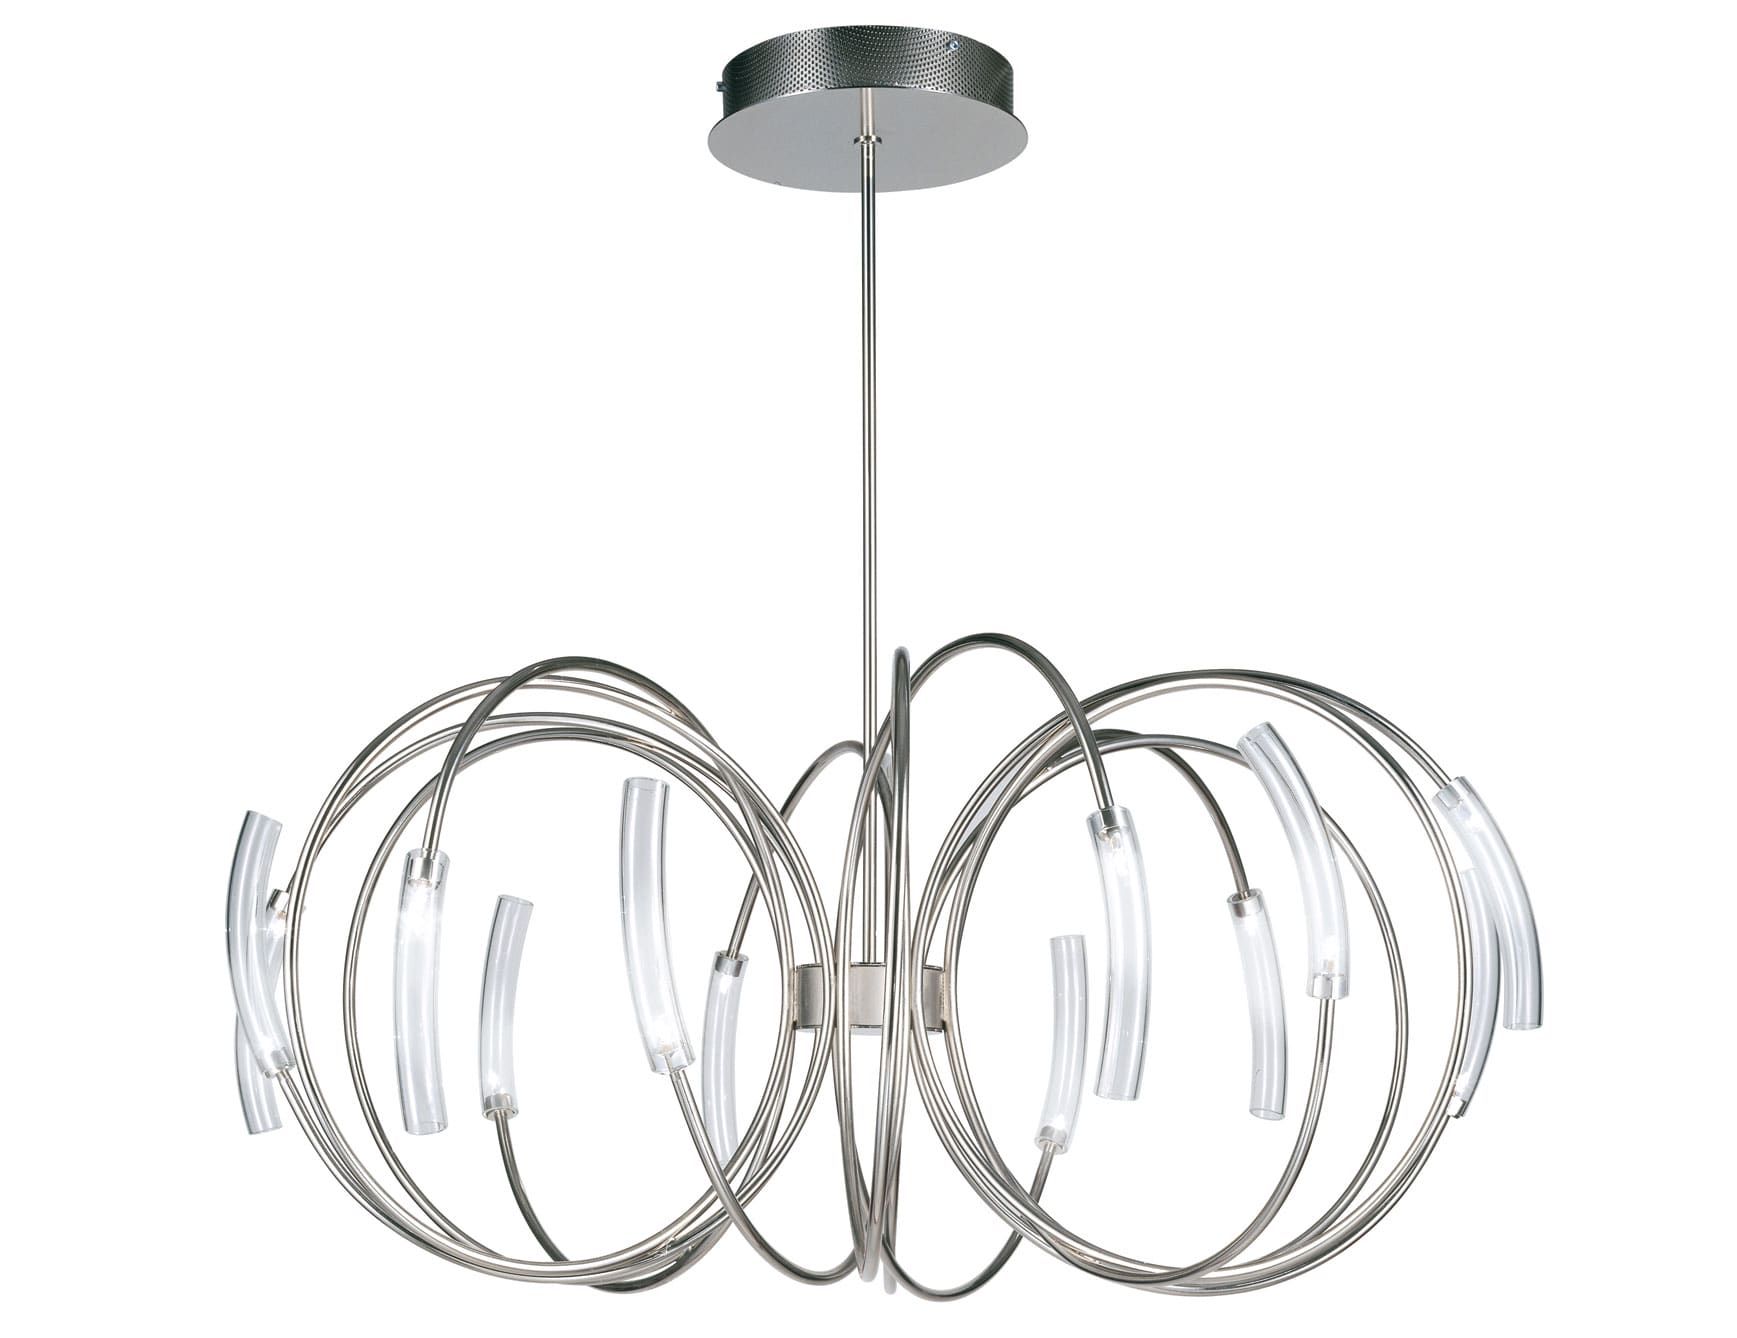 Hook contemporary Italian hanging light with silver metal